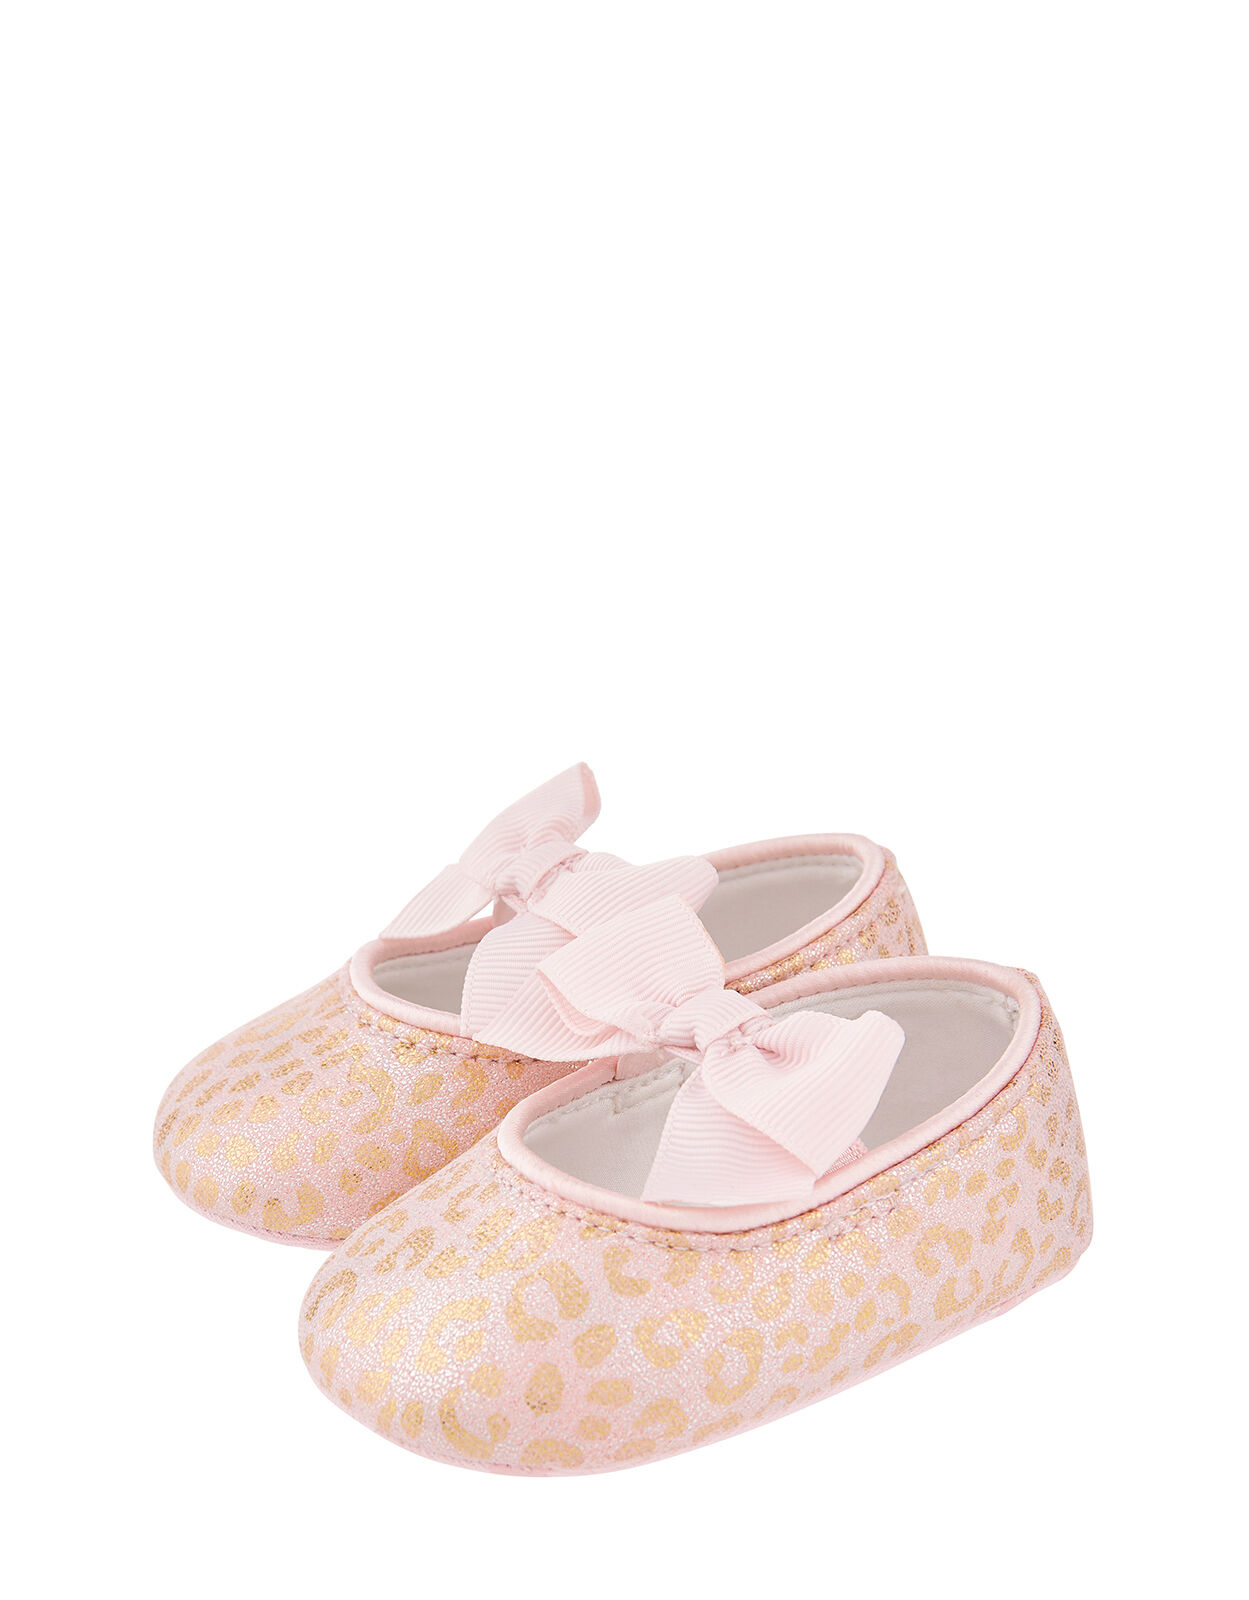 baby bootie shoes